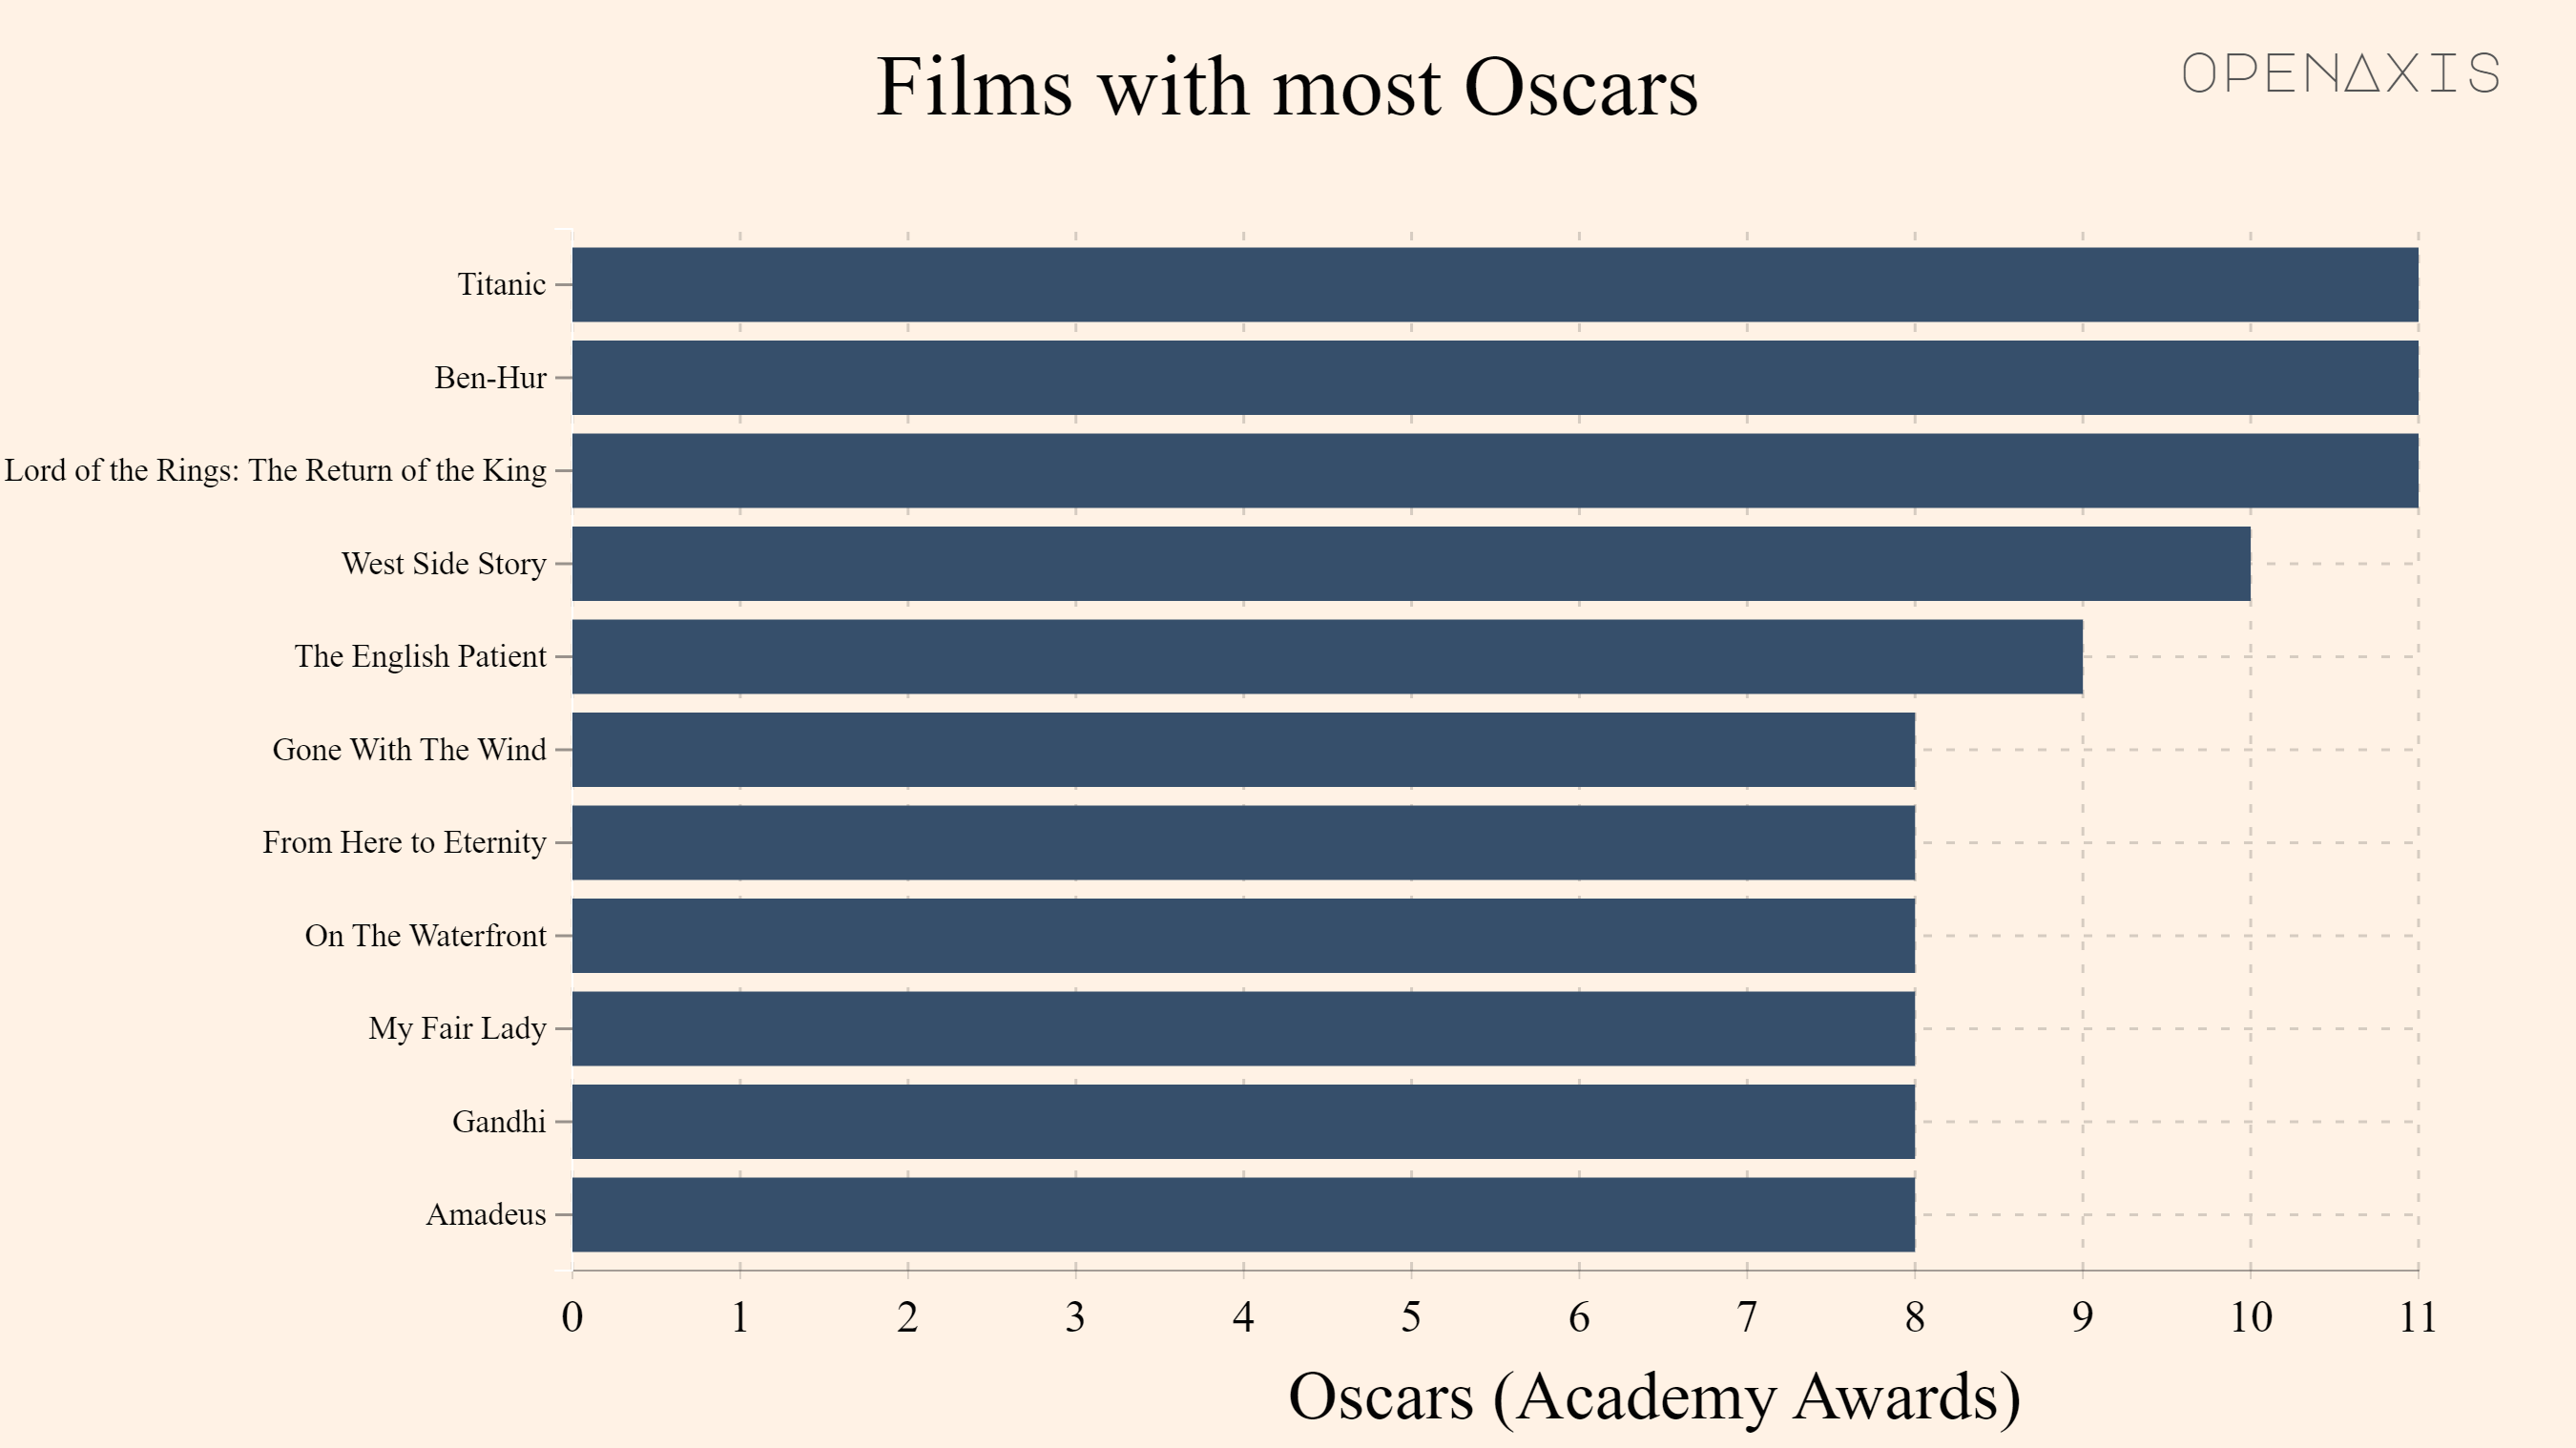 "Films with most Oscars"